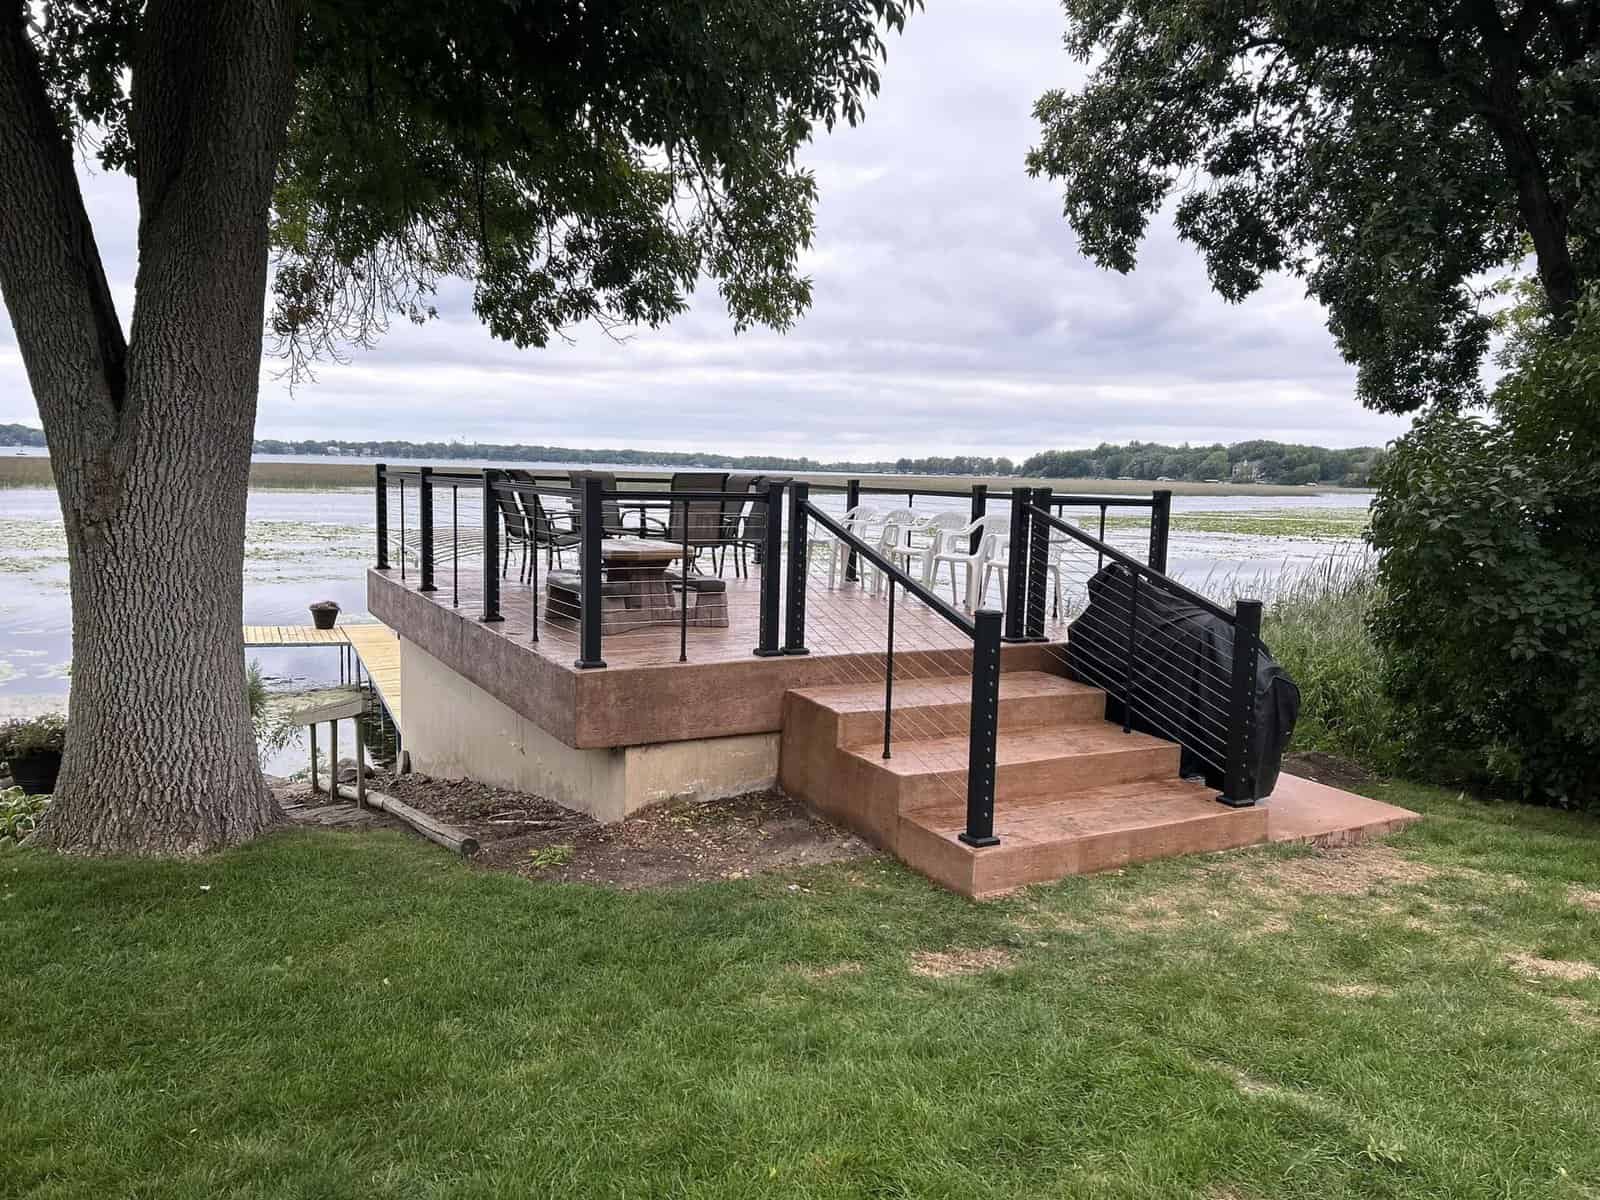 A lakeside wooden deck featuring a staircase, an assortment of chairs and a table, with a view of the water and overcast skies.